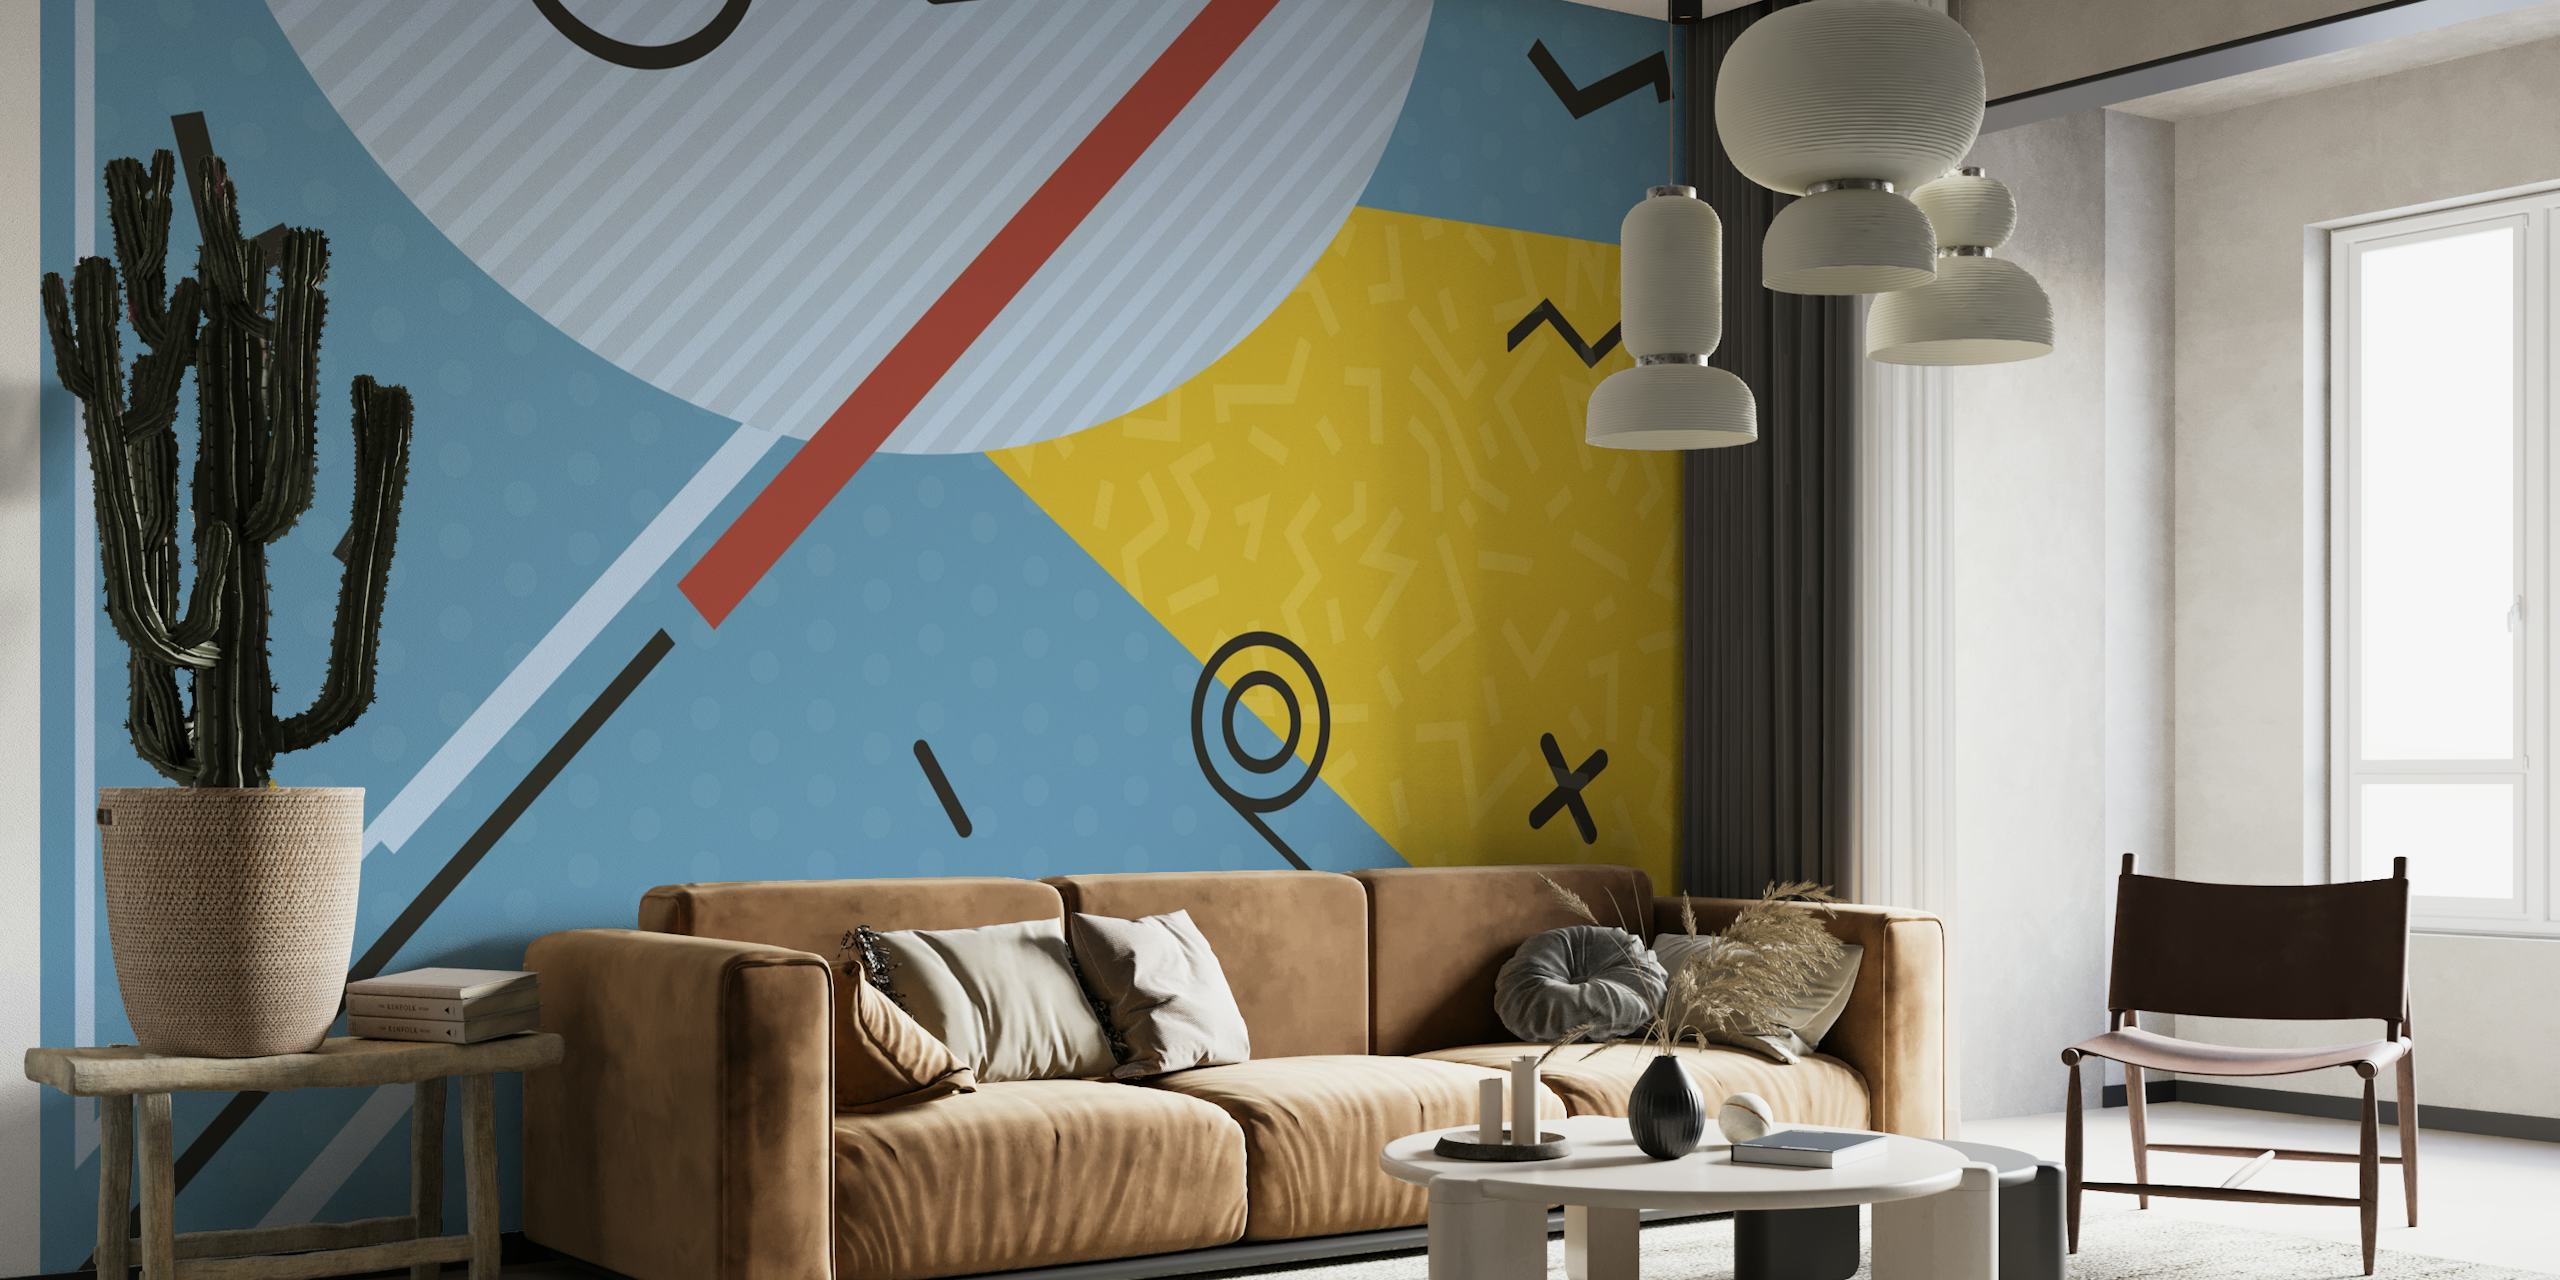 Teal and mustard geometric shapes wall mural